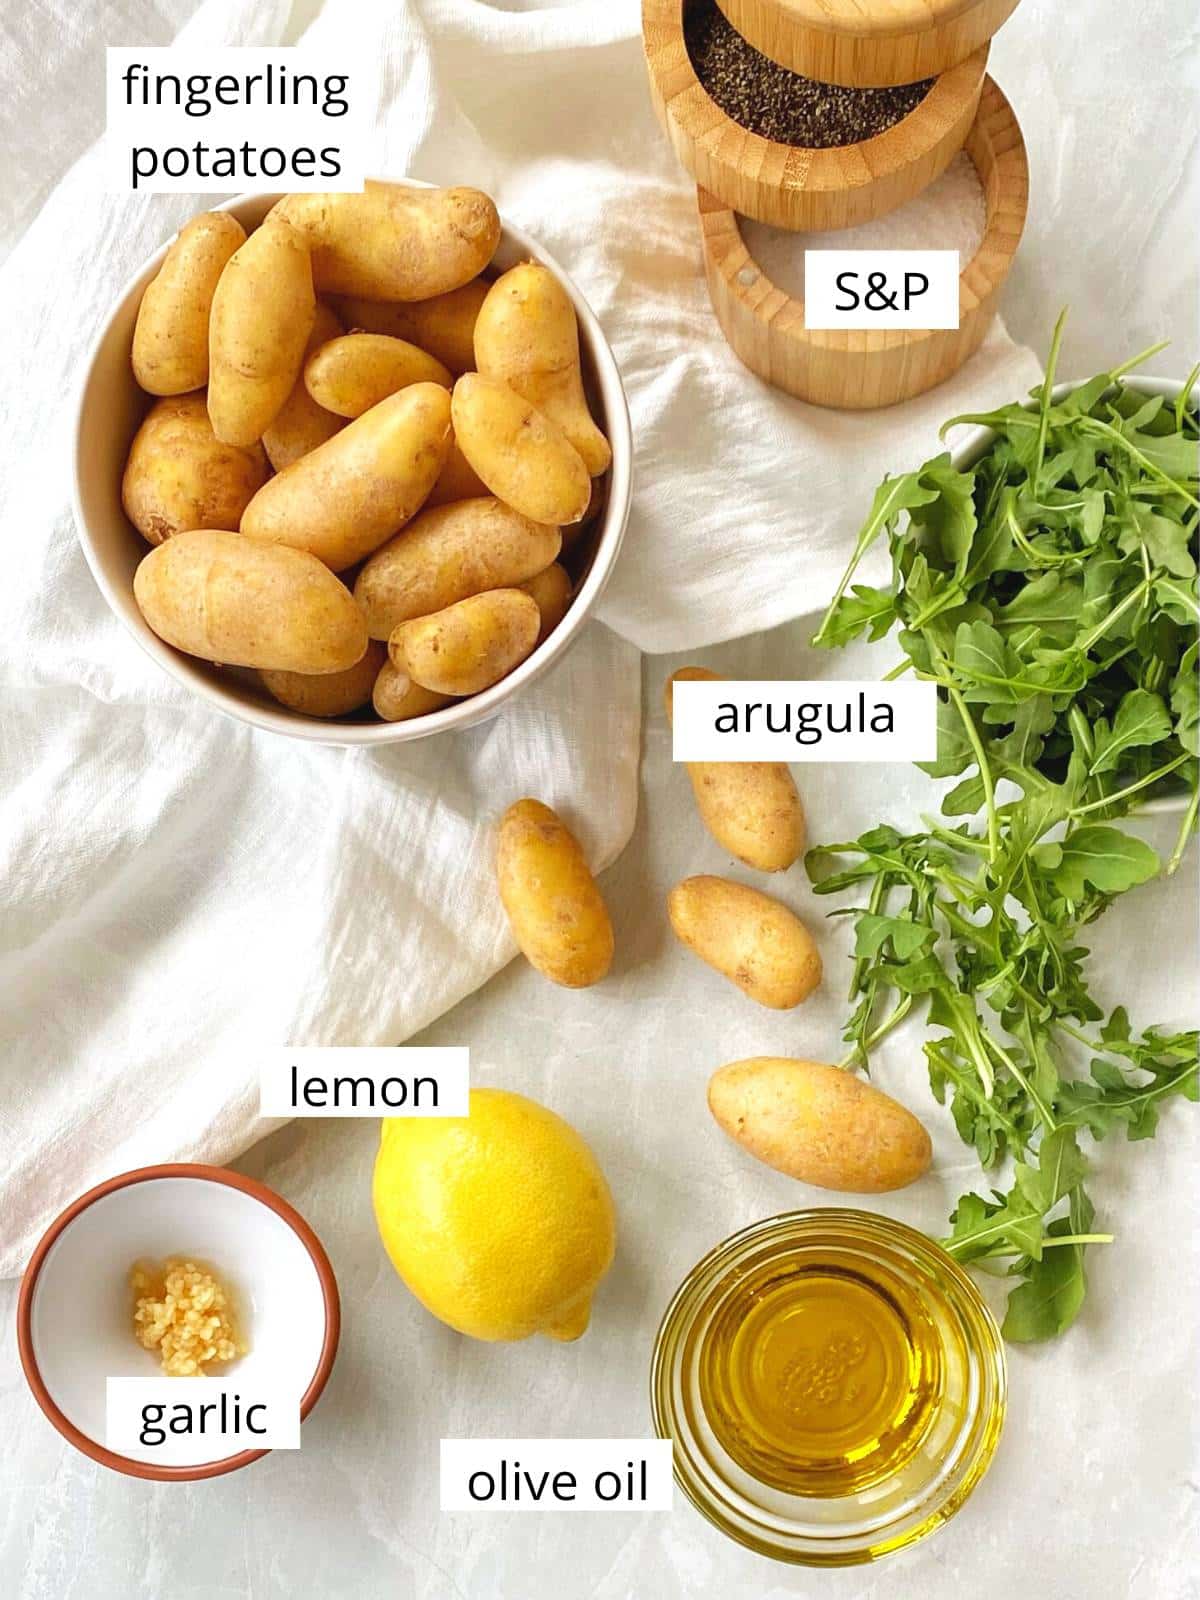 ingredients for fingerling potatoes with herb sauce.